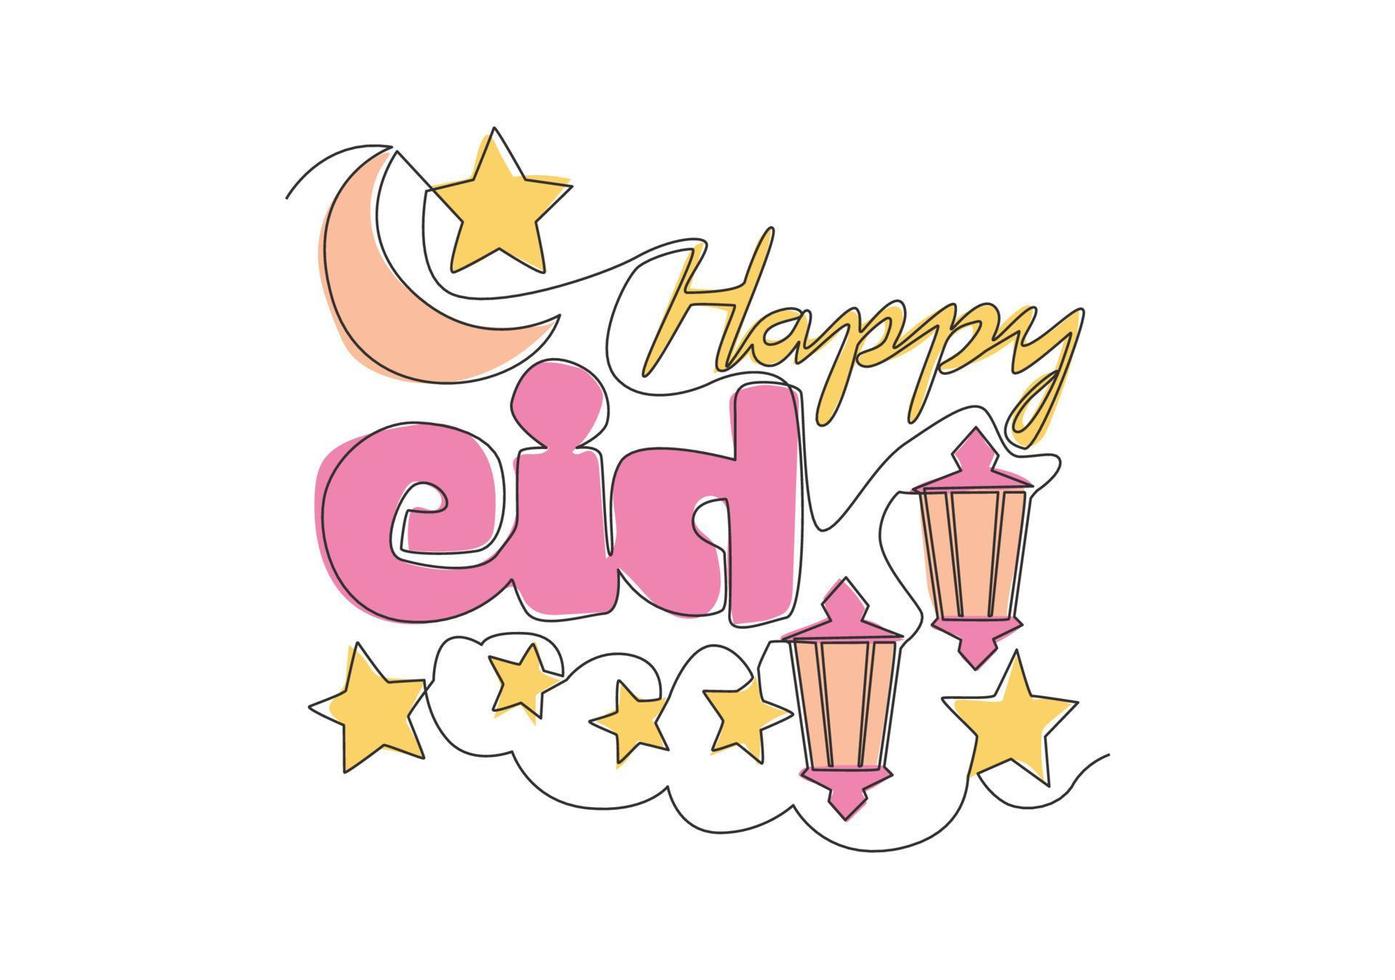 Single continuous line drawing of Happy Eid Al Fitr Mubarak and Ramadan Kareem concept. Islamic holiday calligraphic design for print, greeting card, banner, poster. One line draw design illustration vector